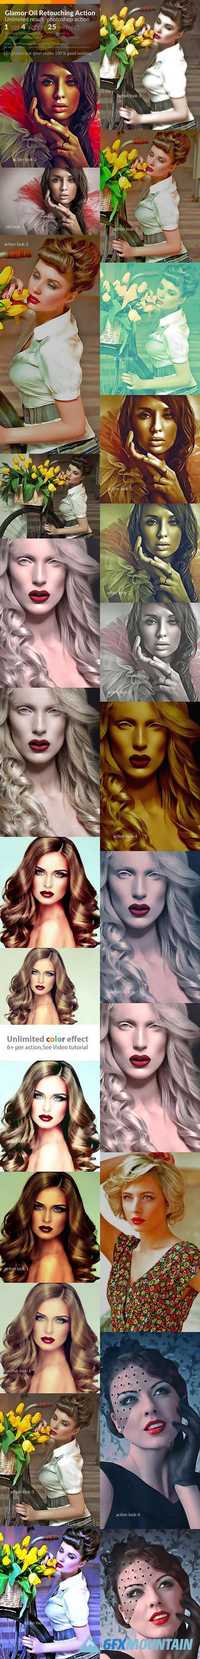 GraphicRiver - Glamour Oil Retouching Photoshop Action 15884950